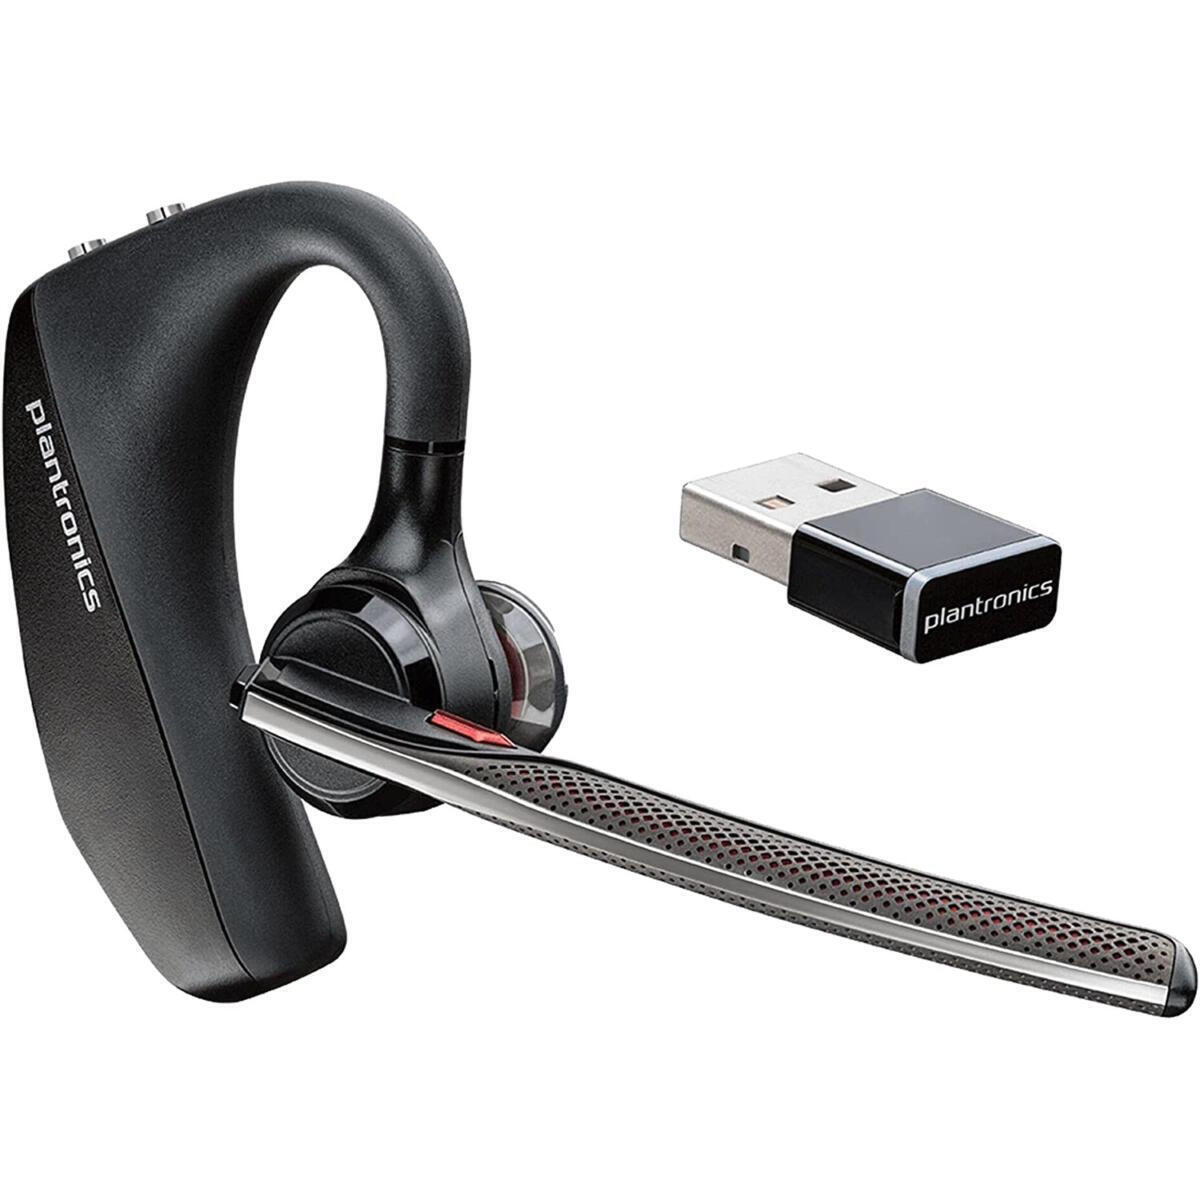 Plantronics Voyager 5200 UC VOIP Headset